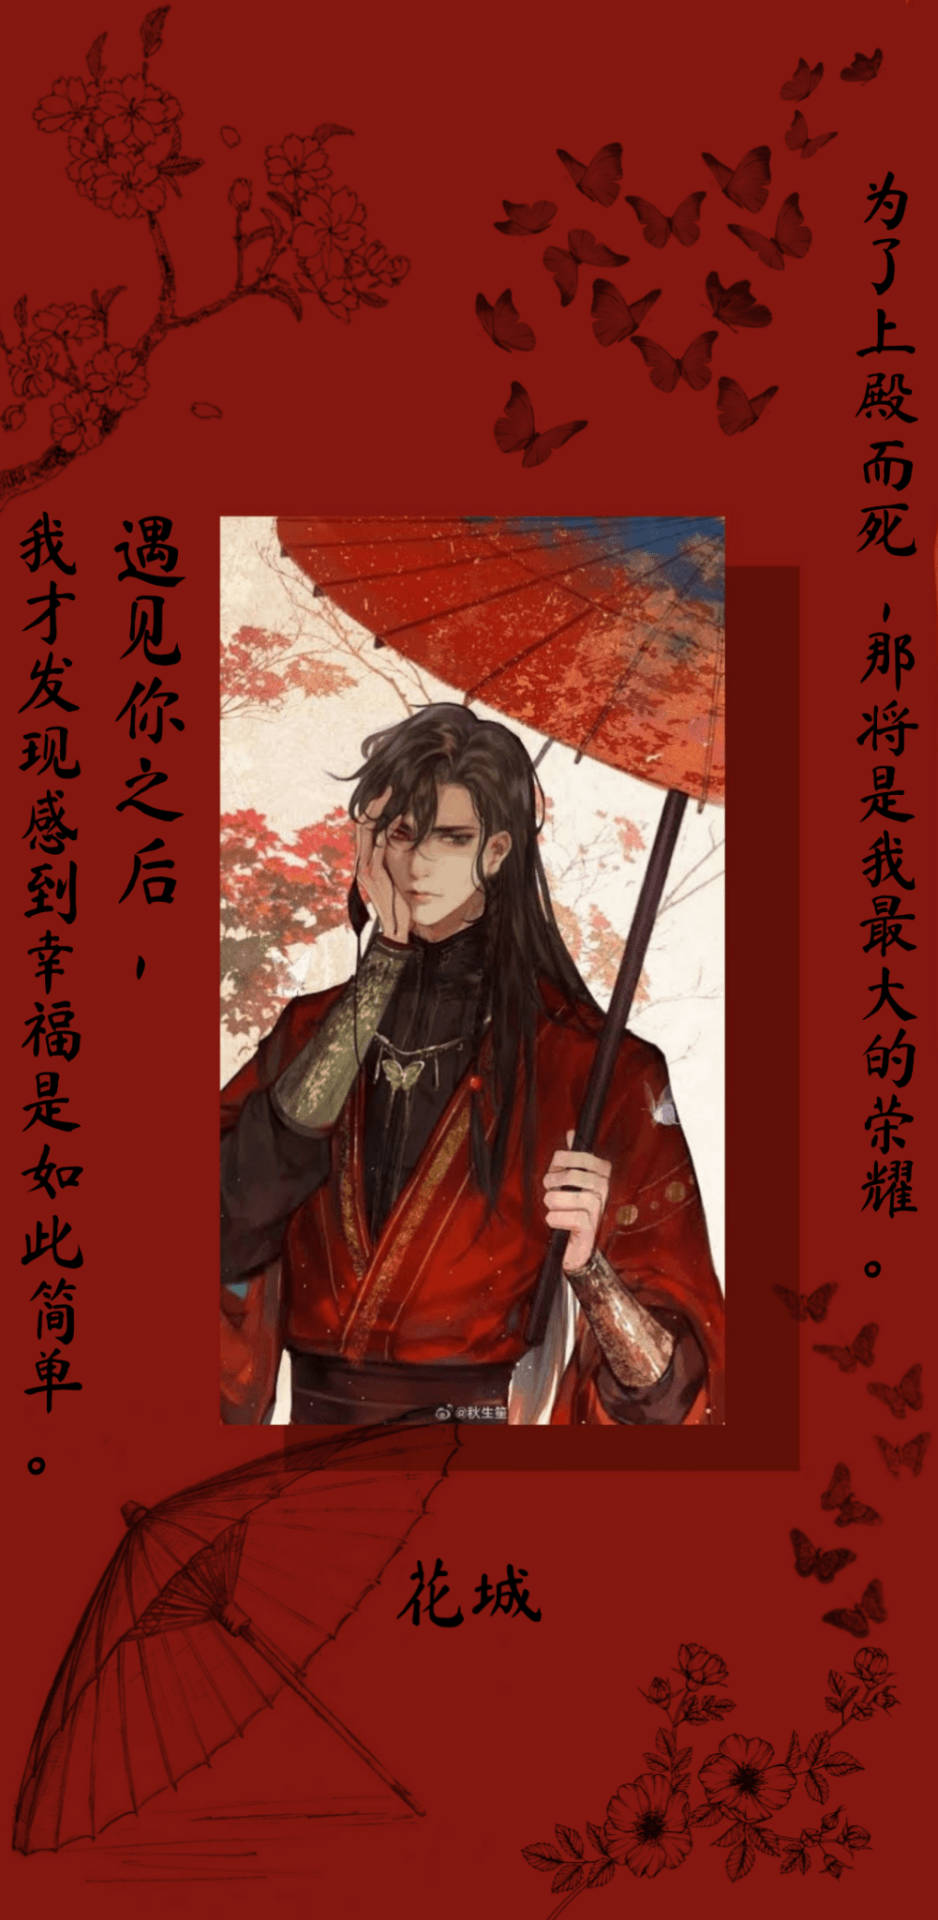 Hua Cheng With Chinese Characters Background